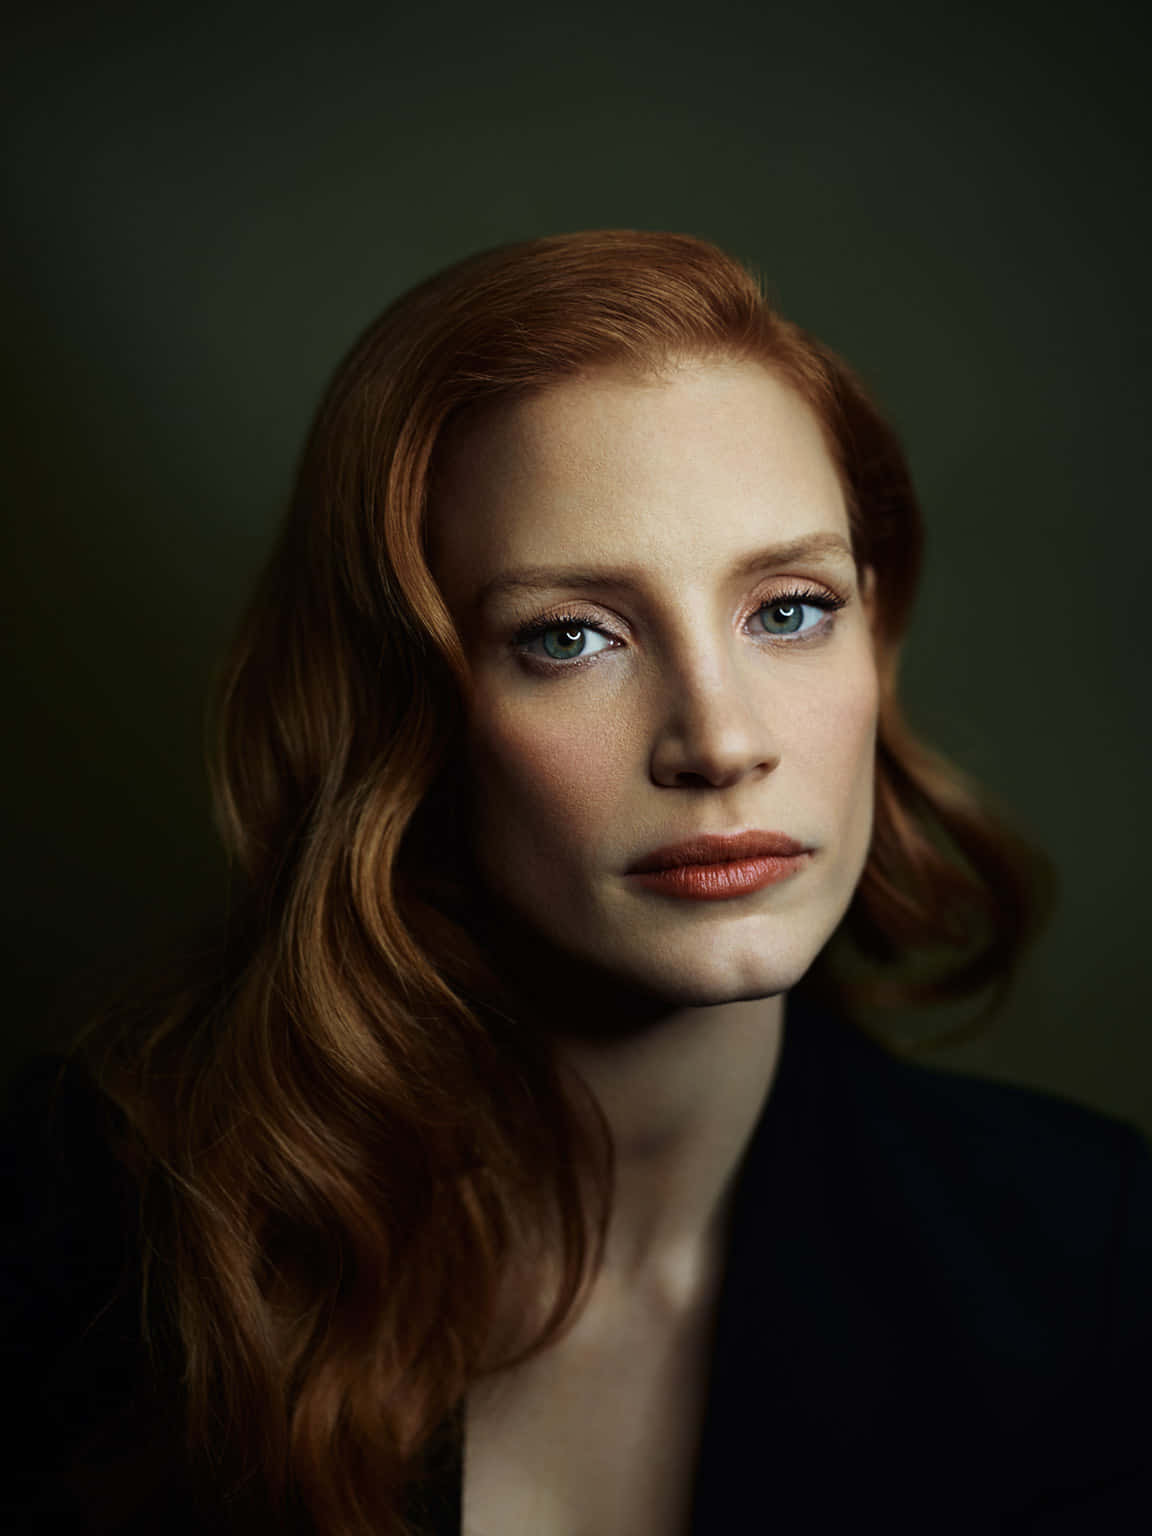 Jessica Chastain posing in an elegant photoshoot Wallpaper